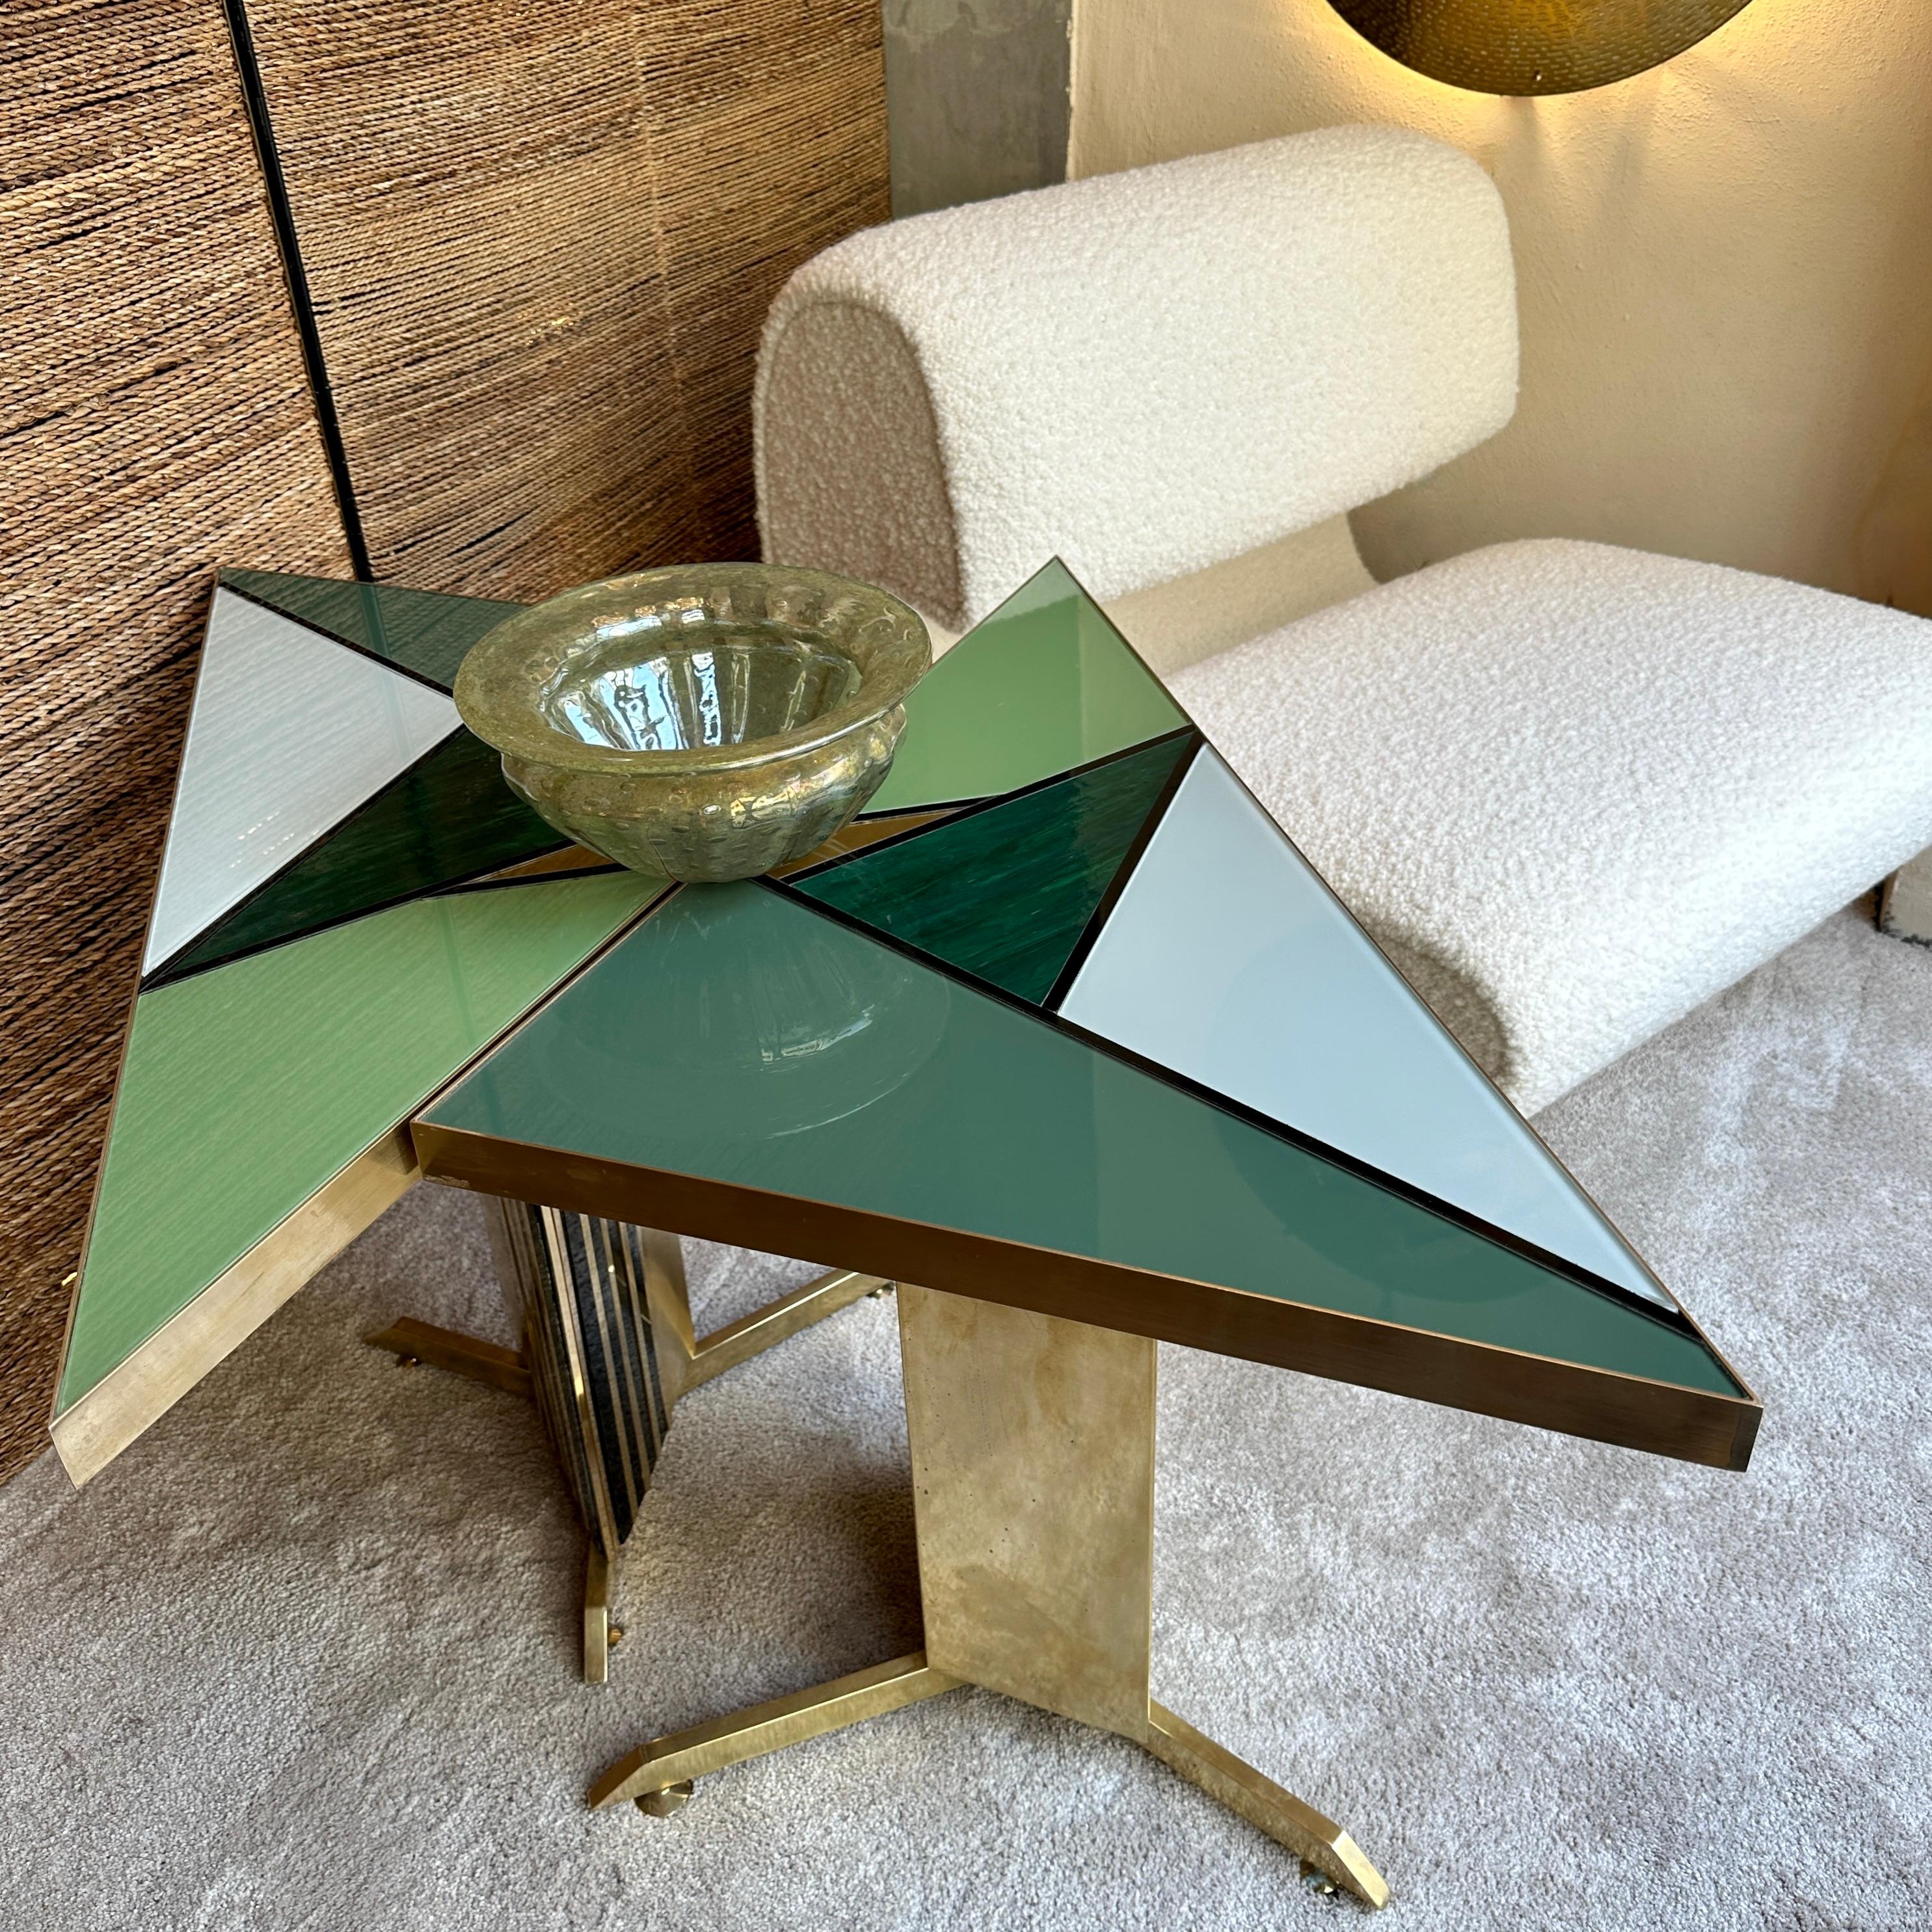 Lates 20th Century Pair of Triangular Brass & Green Art Glass Mosaic Side Tables For Sale 4